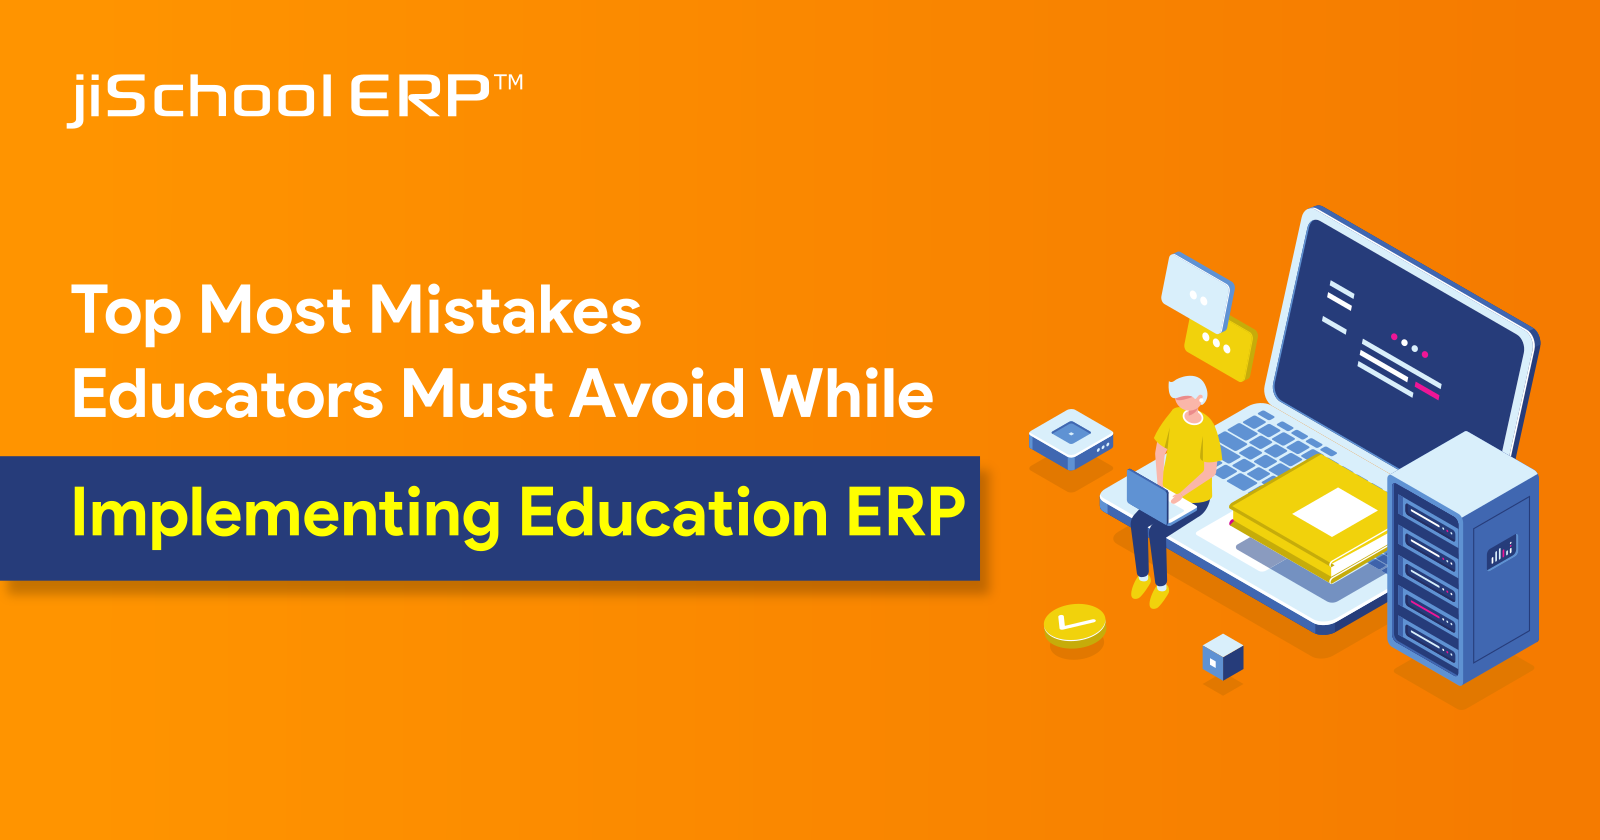 Top Most Mistakes Educators Must Avoid while Implementing Education ERP